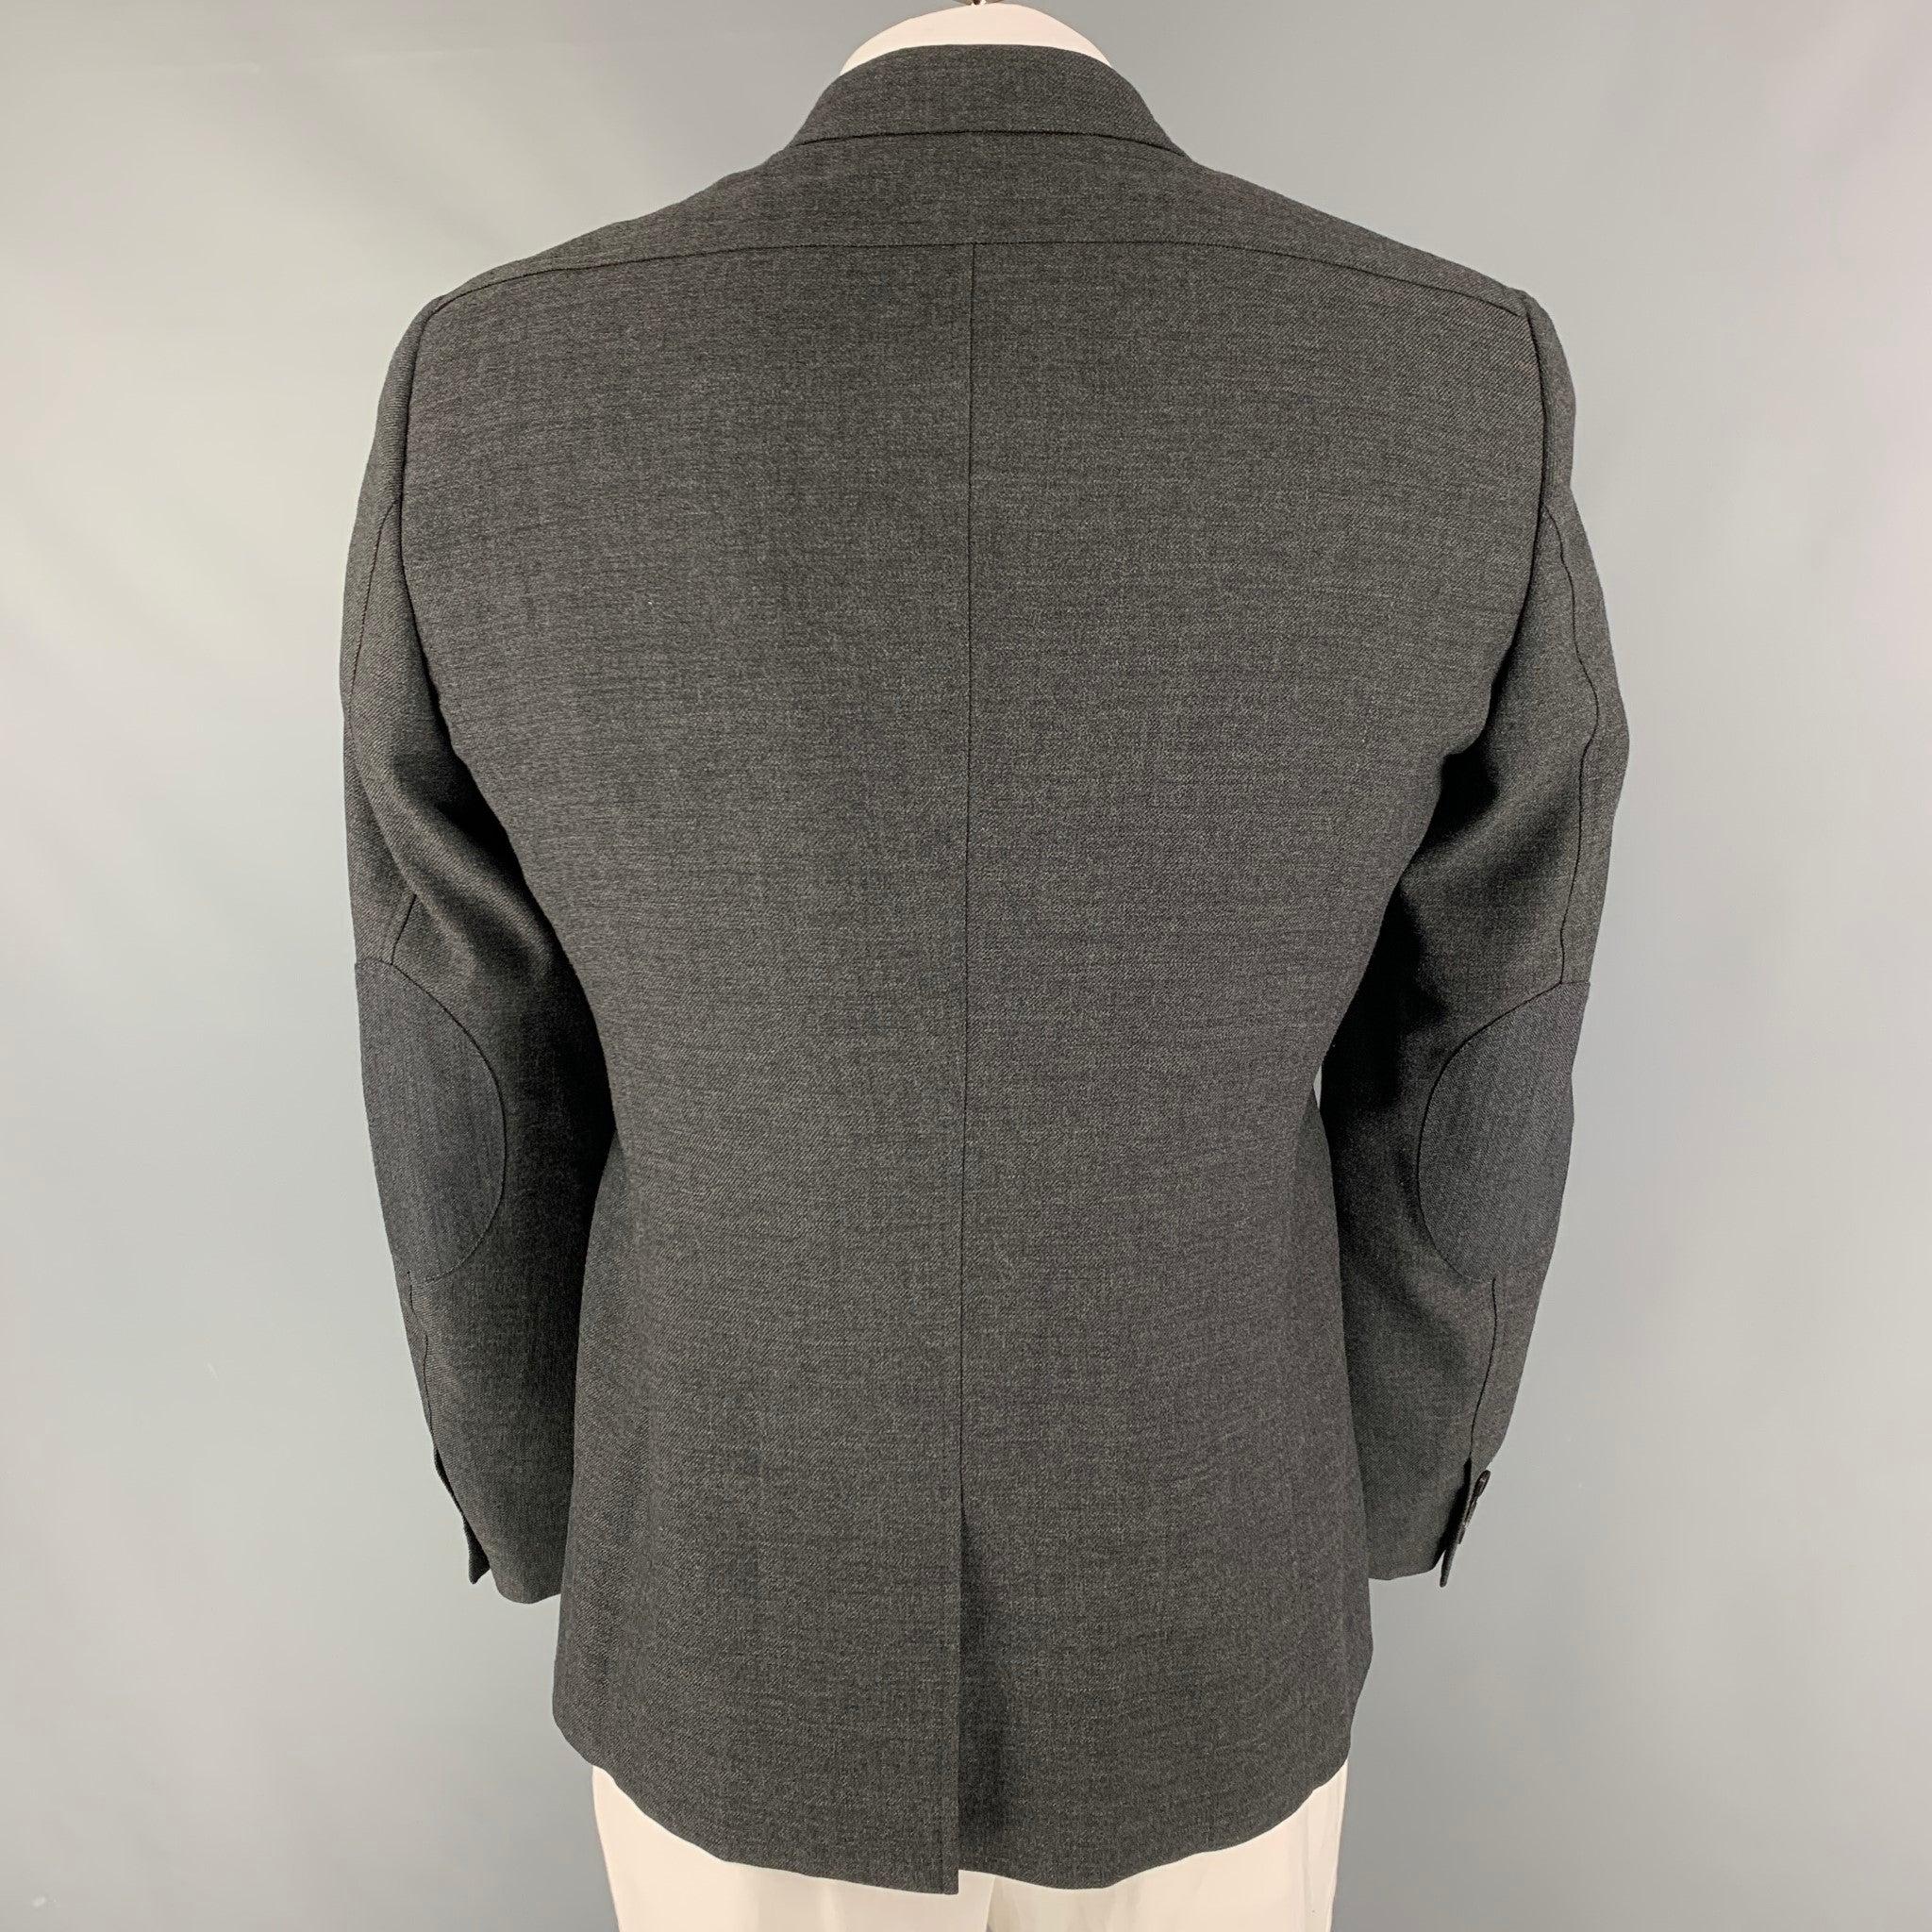 BURBERRY PRORSUM Size 44 Grey Virgin Wool Notch Lapel Sport Coat In Good Condition For Sale In San Francisco, CA